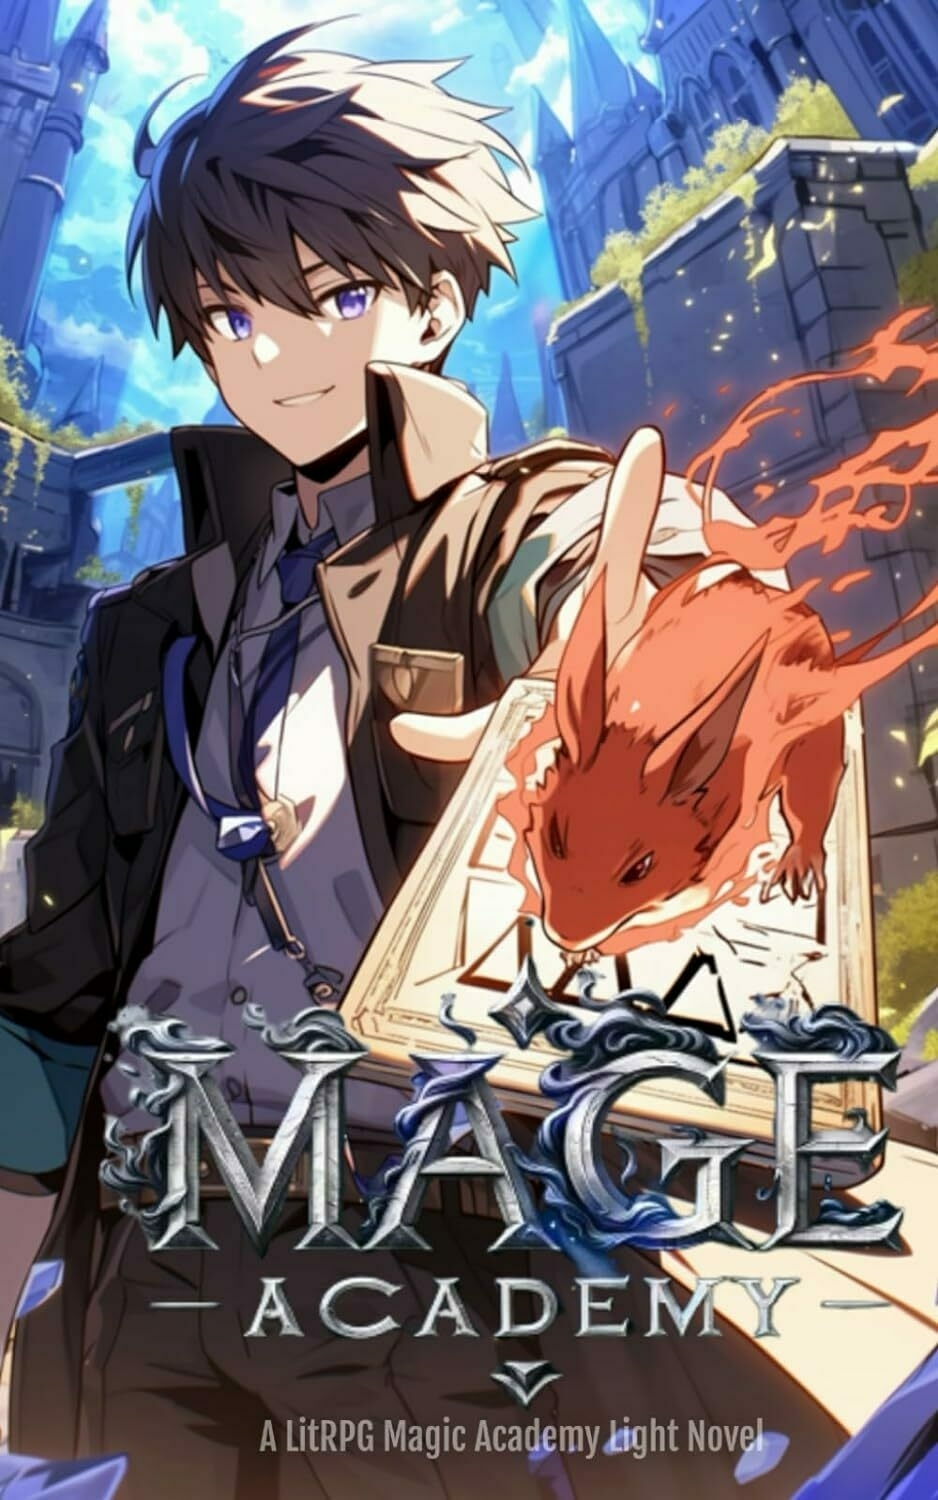 A smiling young man stands with a fiery, fox-like creature perched on an open book, against a backdrop of a fantasy academy. Text reads: 'MAGE ACADEMY A LitRPG Magic Academy light Novel'.